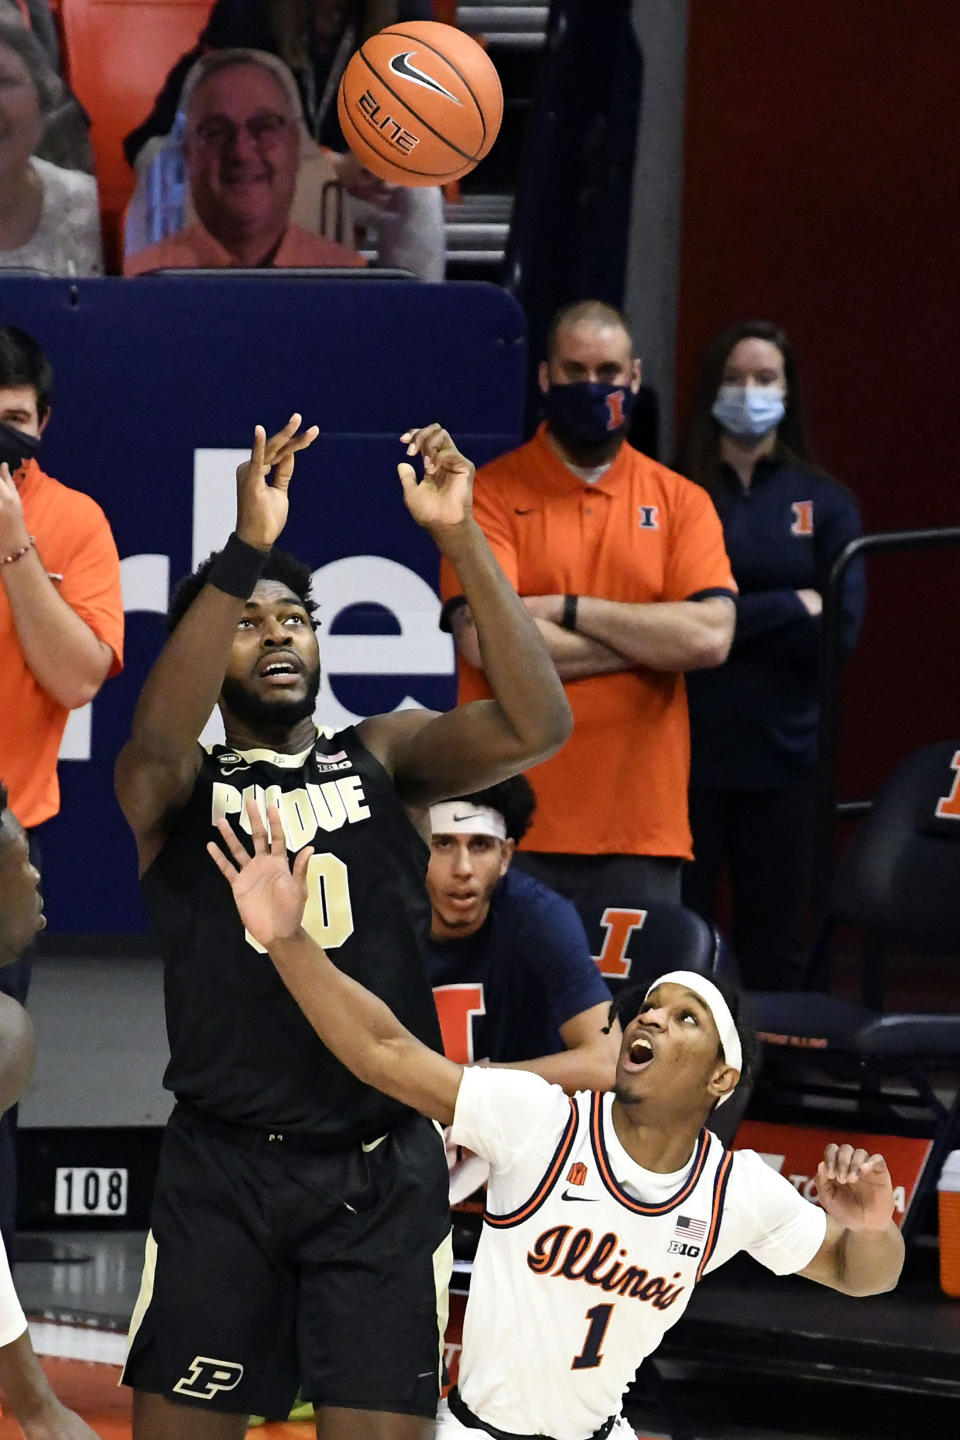 Purdue's forward Trevion Williams (50) tries to control the ball after it is tipped by Illinois guard Trent Frazier (1) in the first half of an NCAA college basketball game Saturday, Jan. 2, 2021, in Champaign, Ill. (AP Photo/Holly Hart)